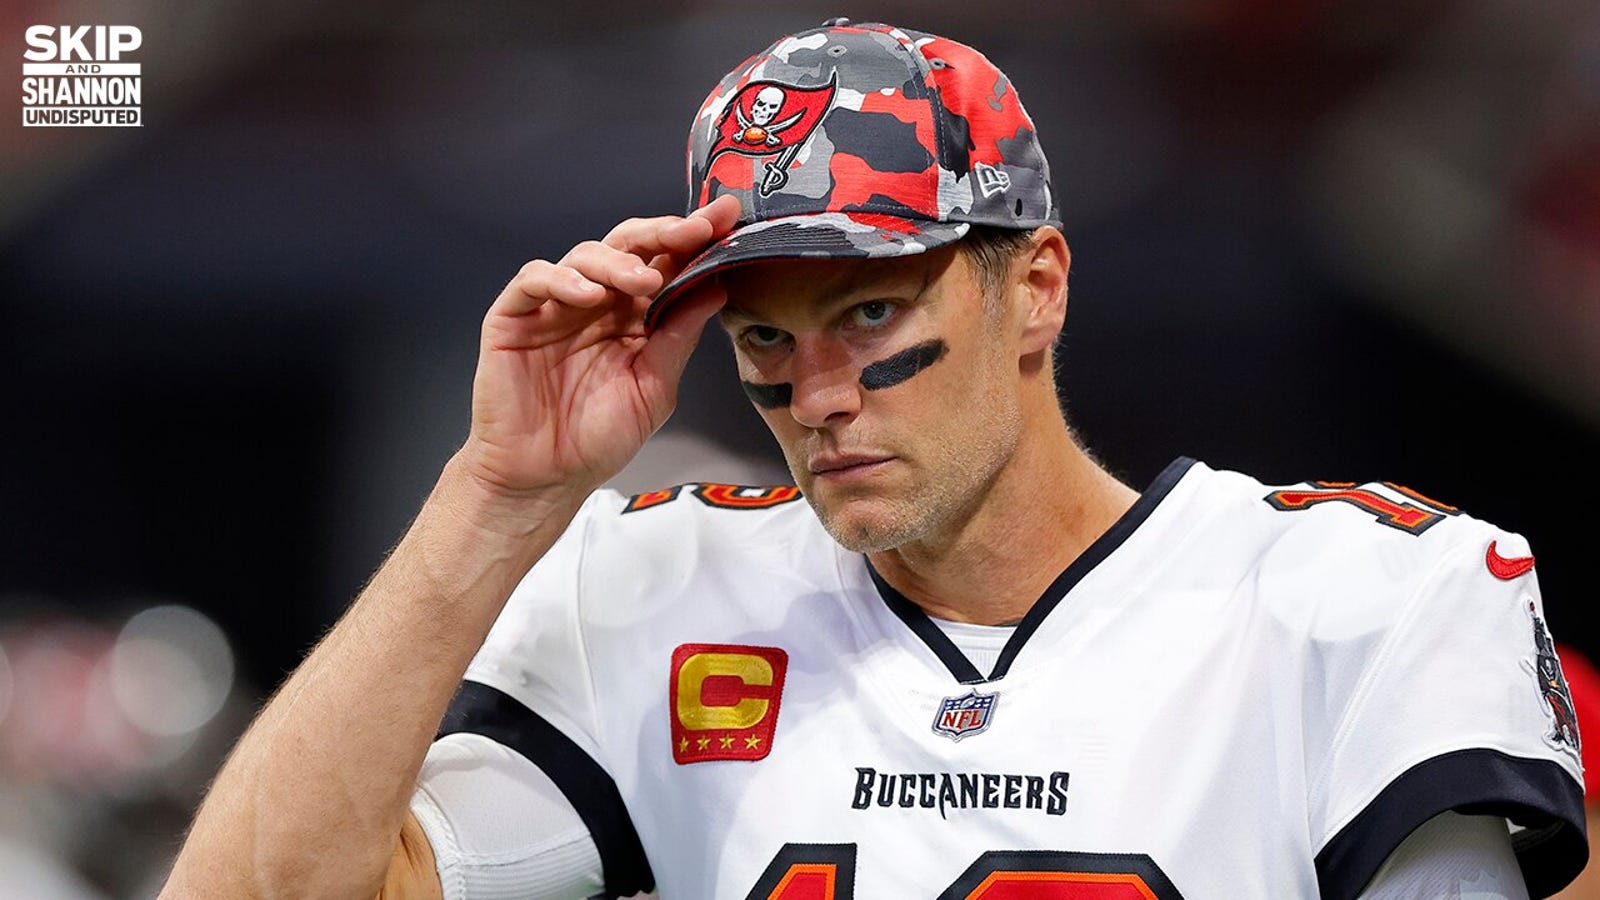 Buccaneers want Tom Brady back;  Raiders, Titans and 49ers among interested teams.